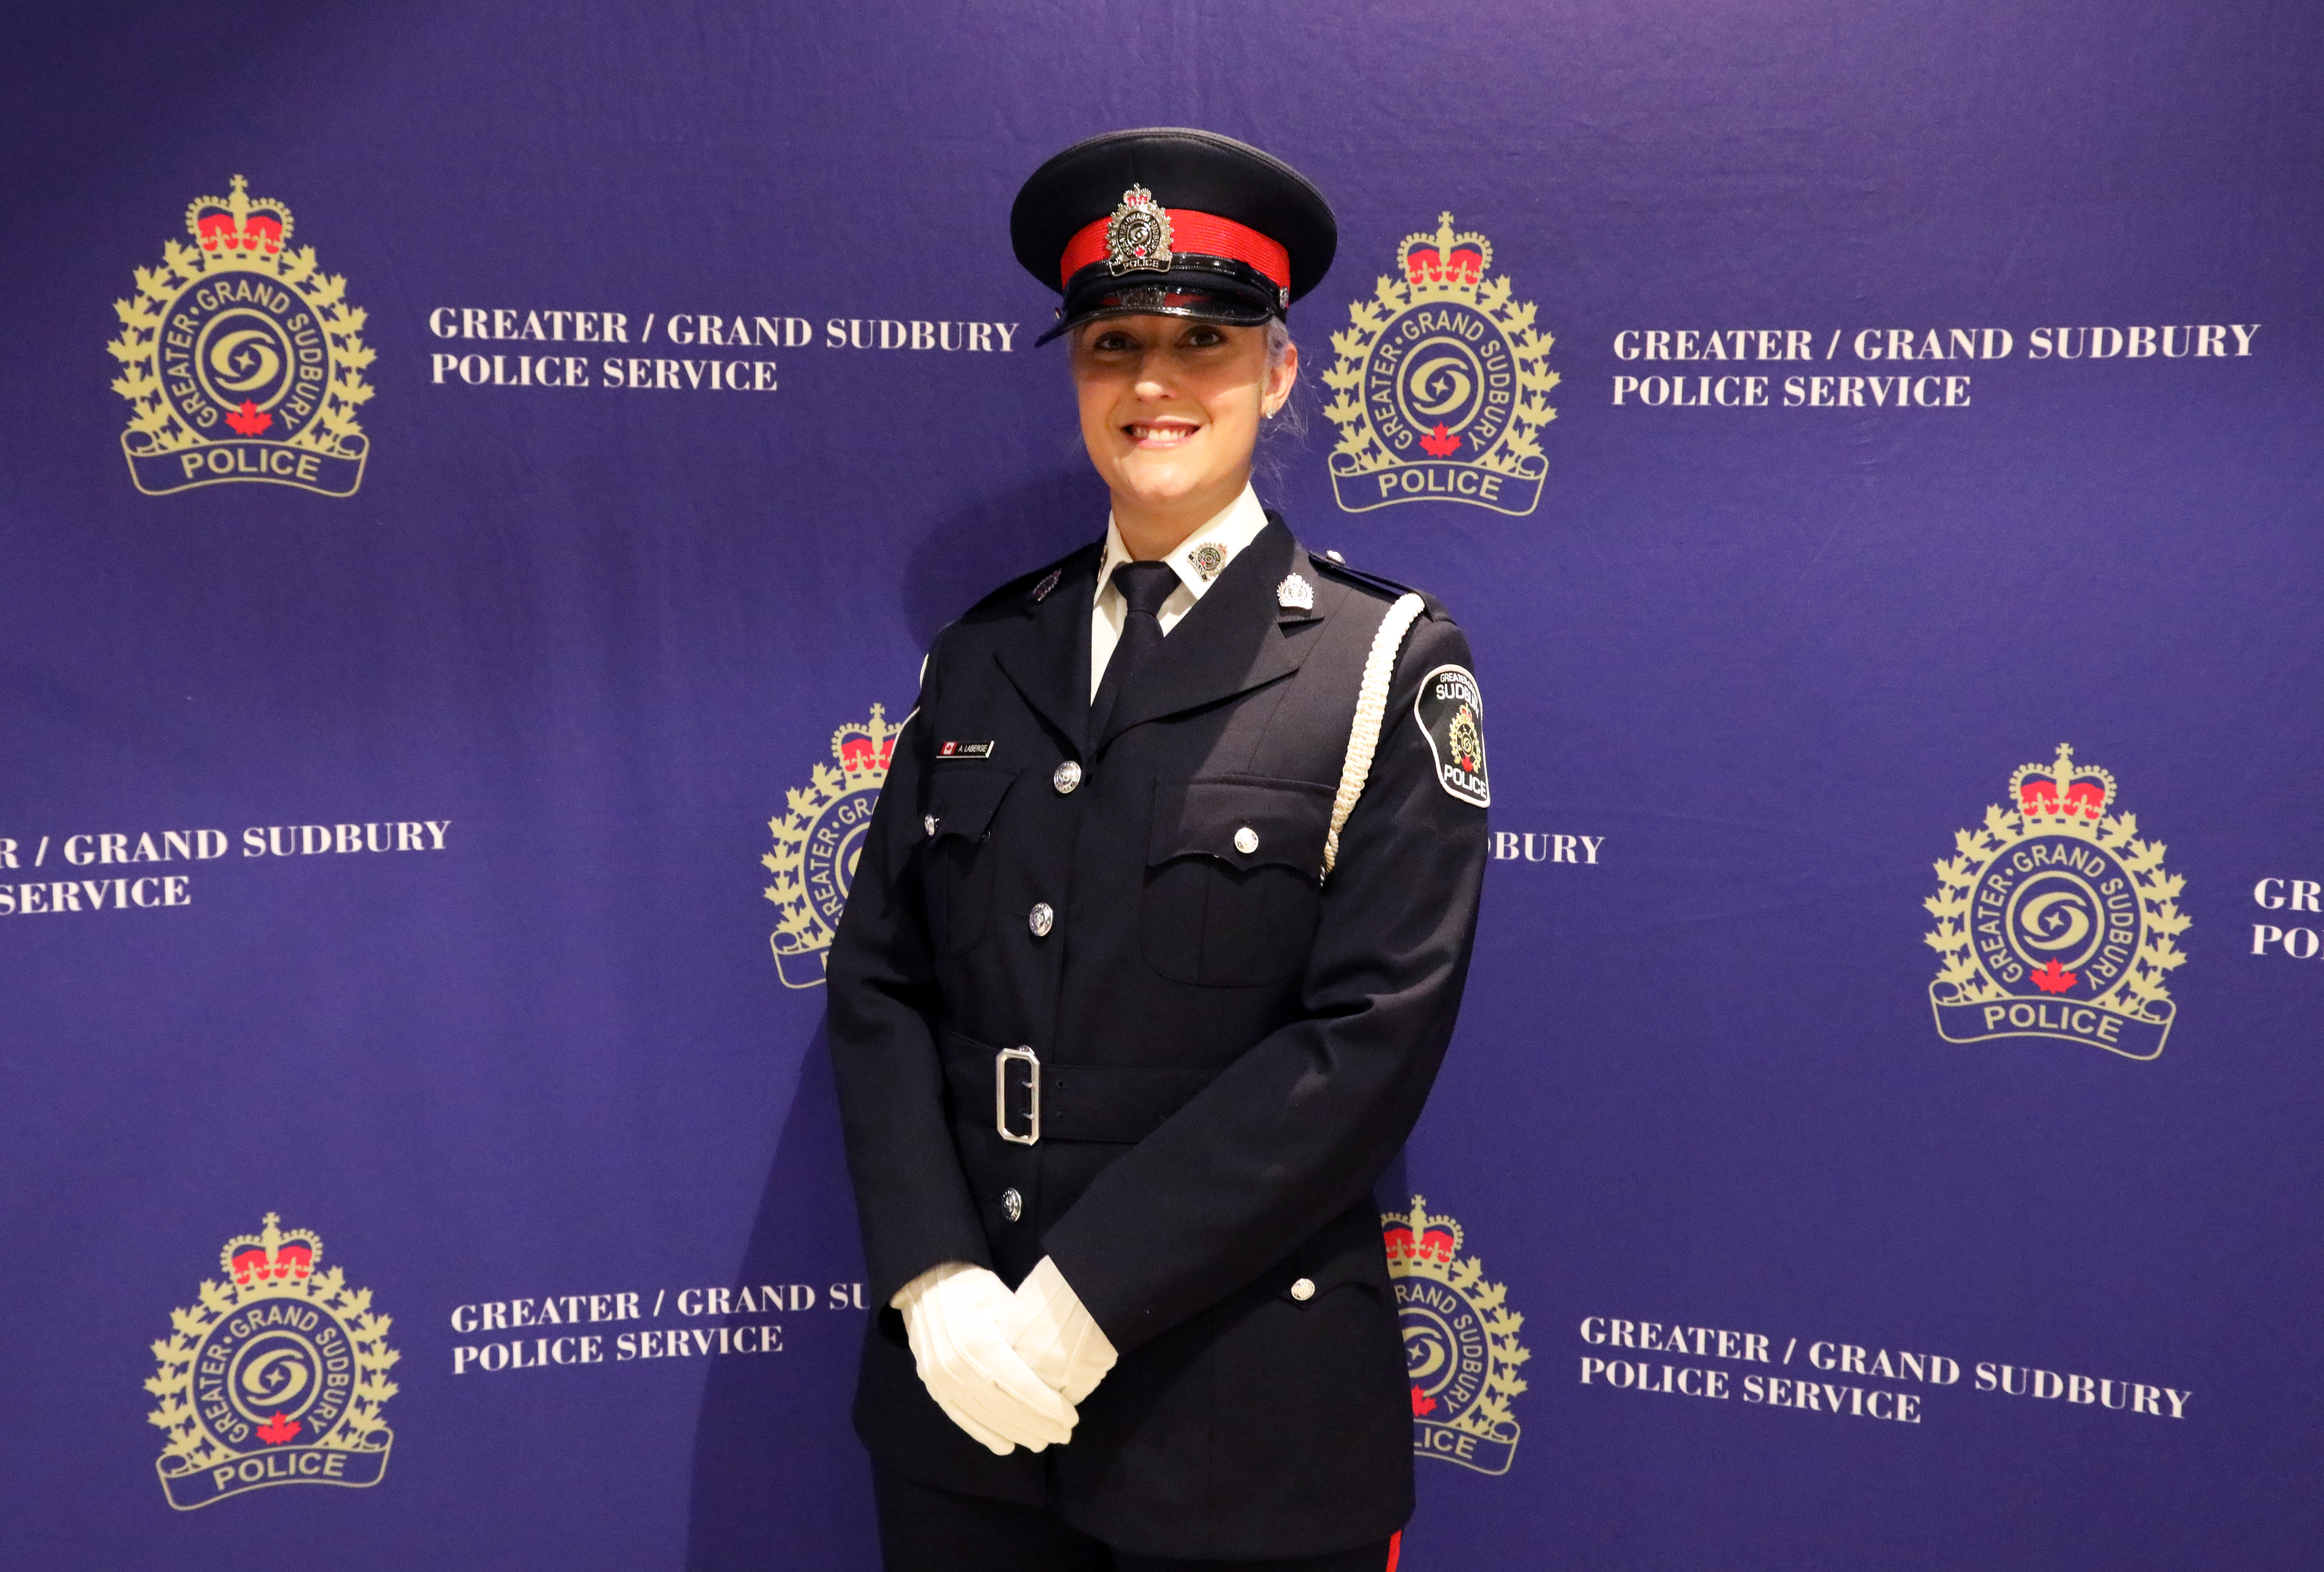 officer in uniform standing and smiling